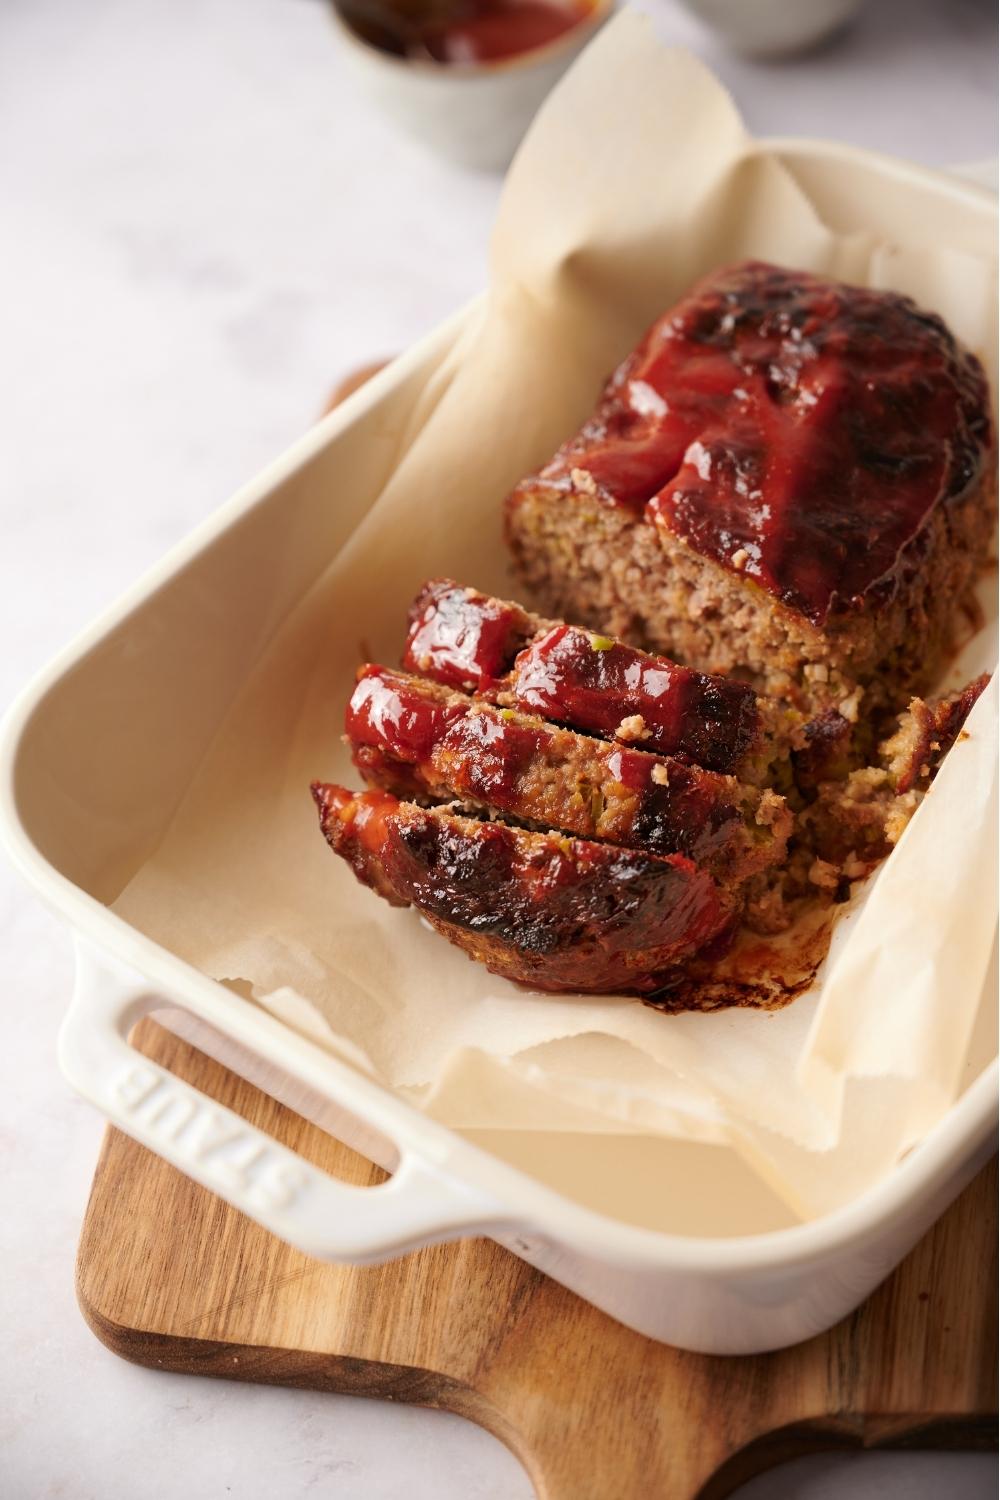 Southern meatloaf on parchment paper in a white baking dish. The dish is resting on a wood cutting board. The meatloaf has been slice to serve and layers are stacked on top of one another.